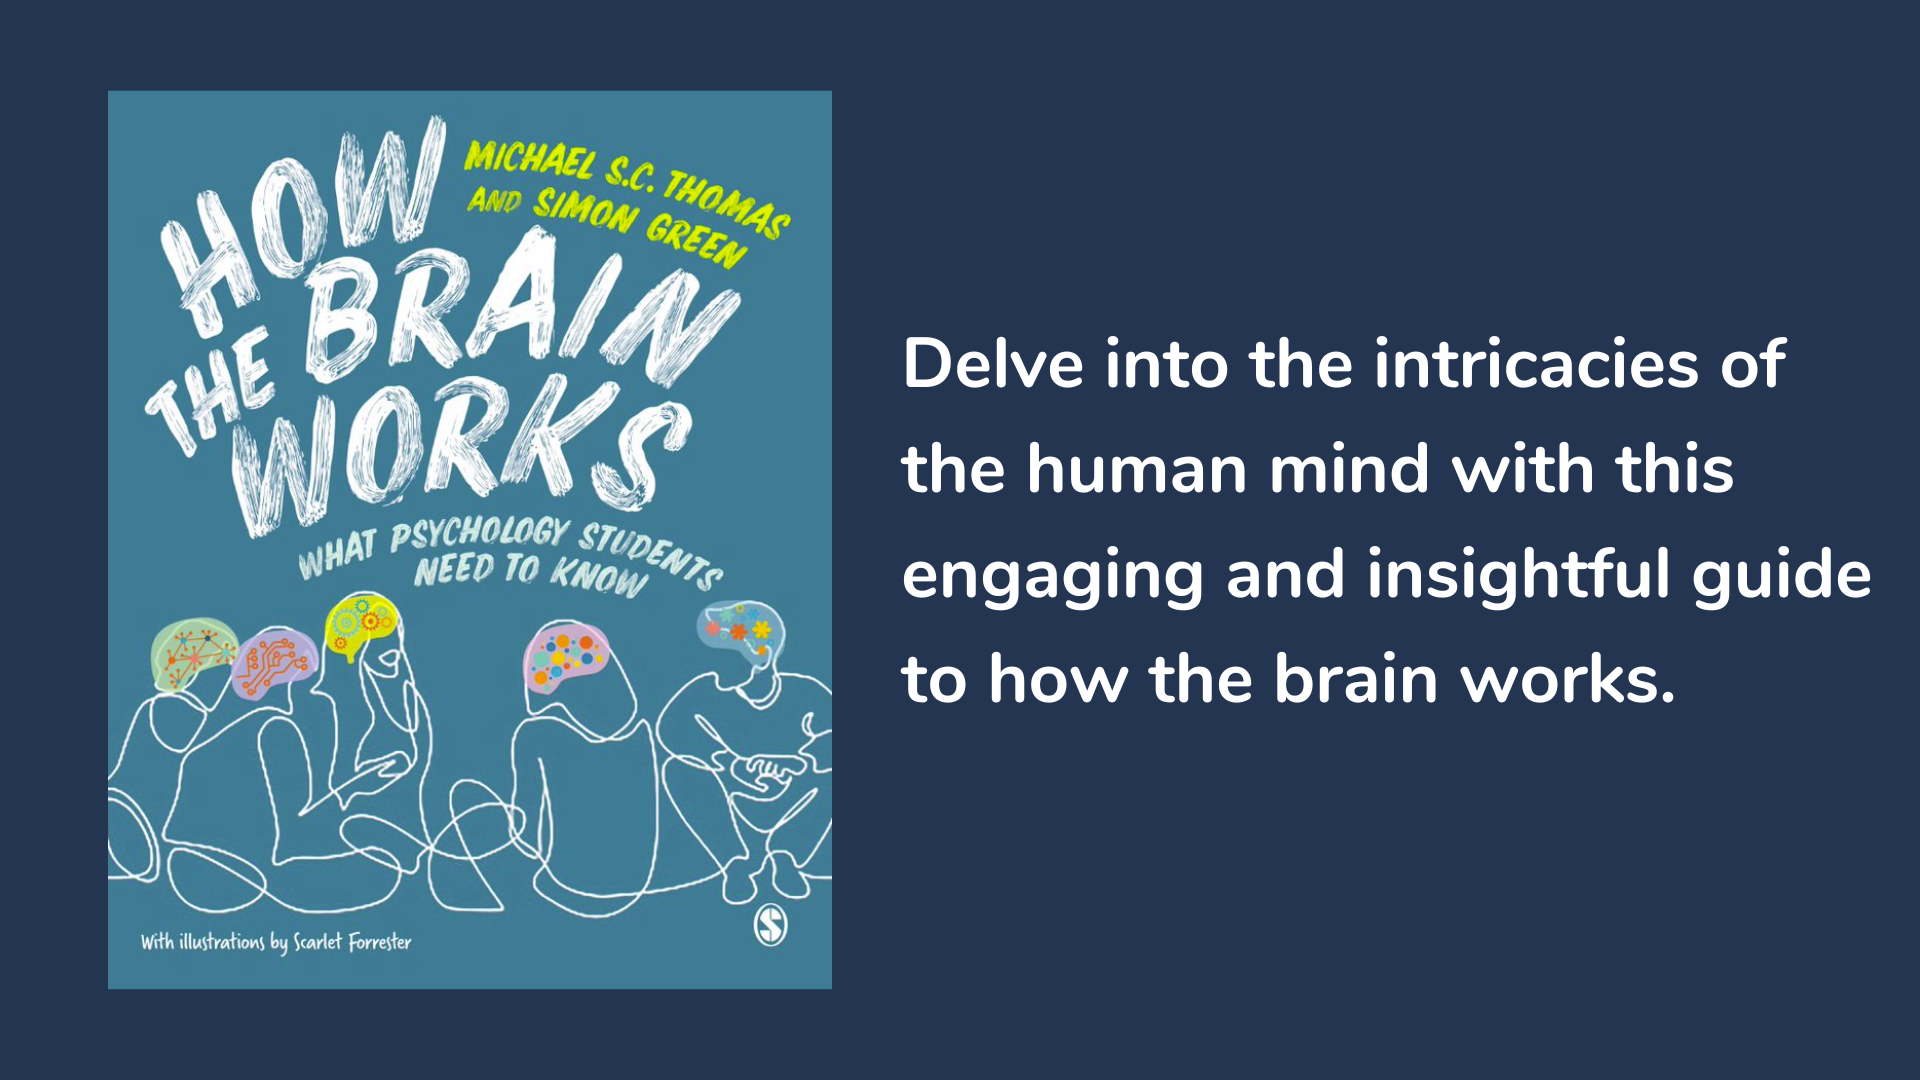 How the Brain Works: What Psychology Students Need to Know, Book cover and description.